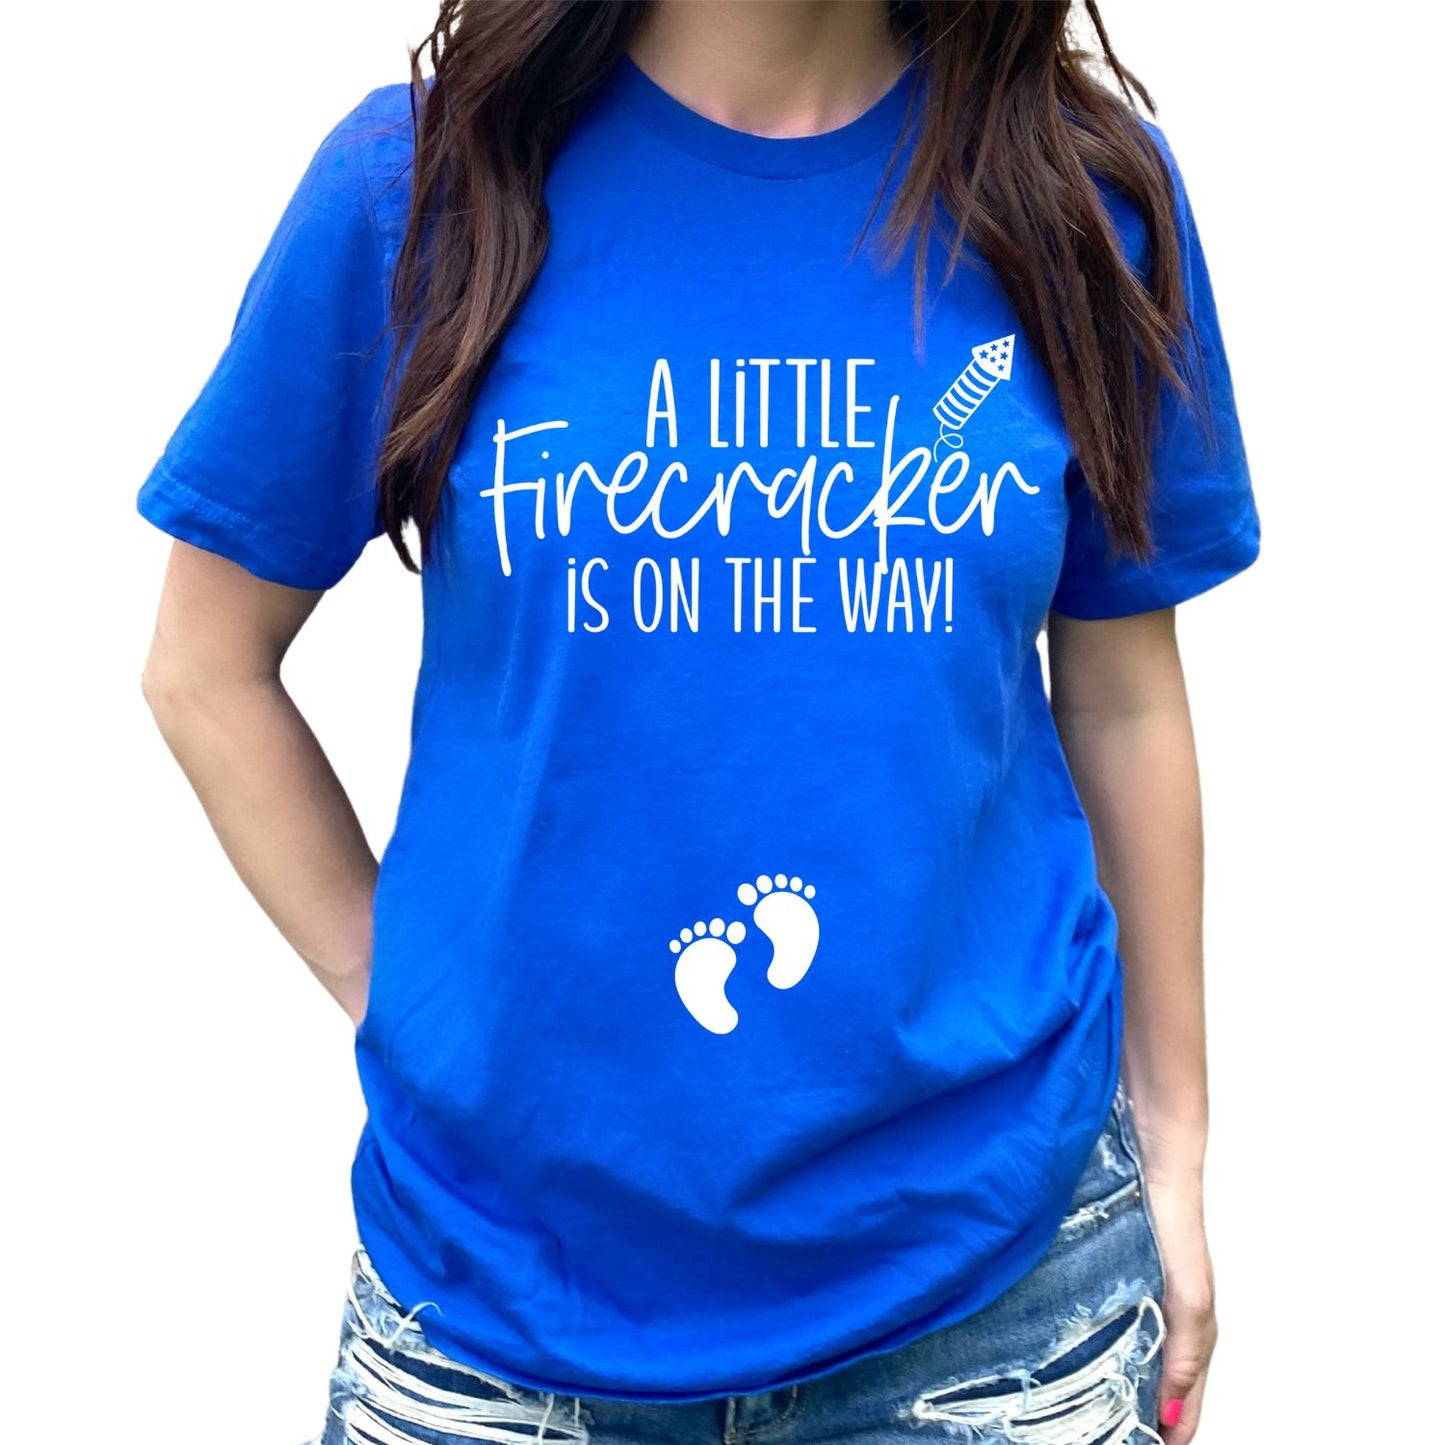 Excited to Say... | A Little Firecracker is On The Way